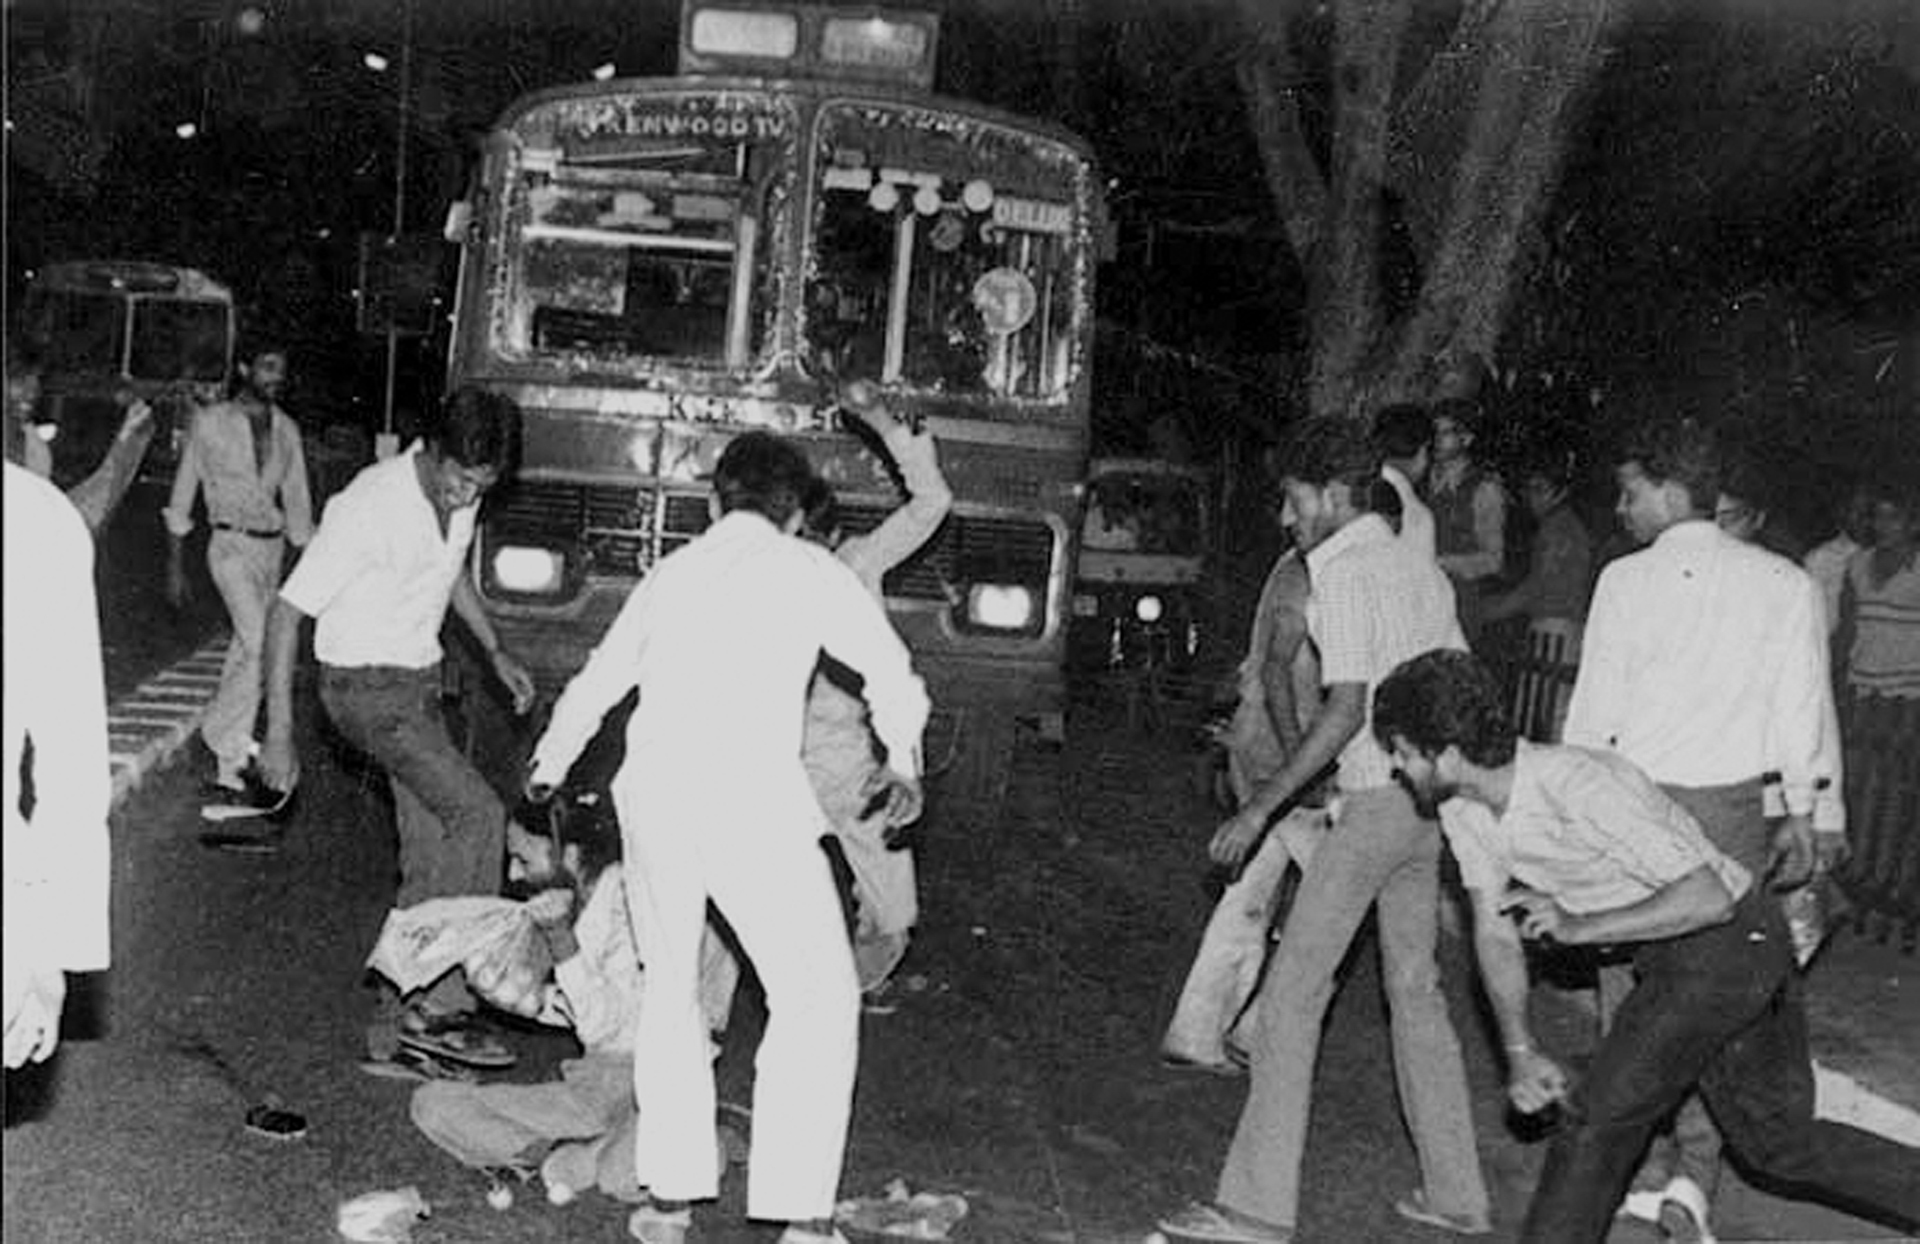 How nine official inquiries obscured the truth of the 1984 anti-Sikh violence